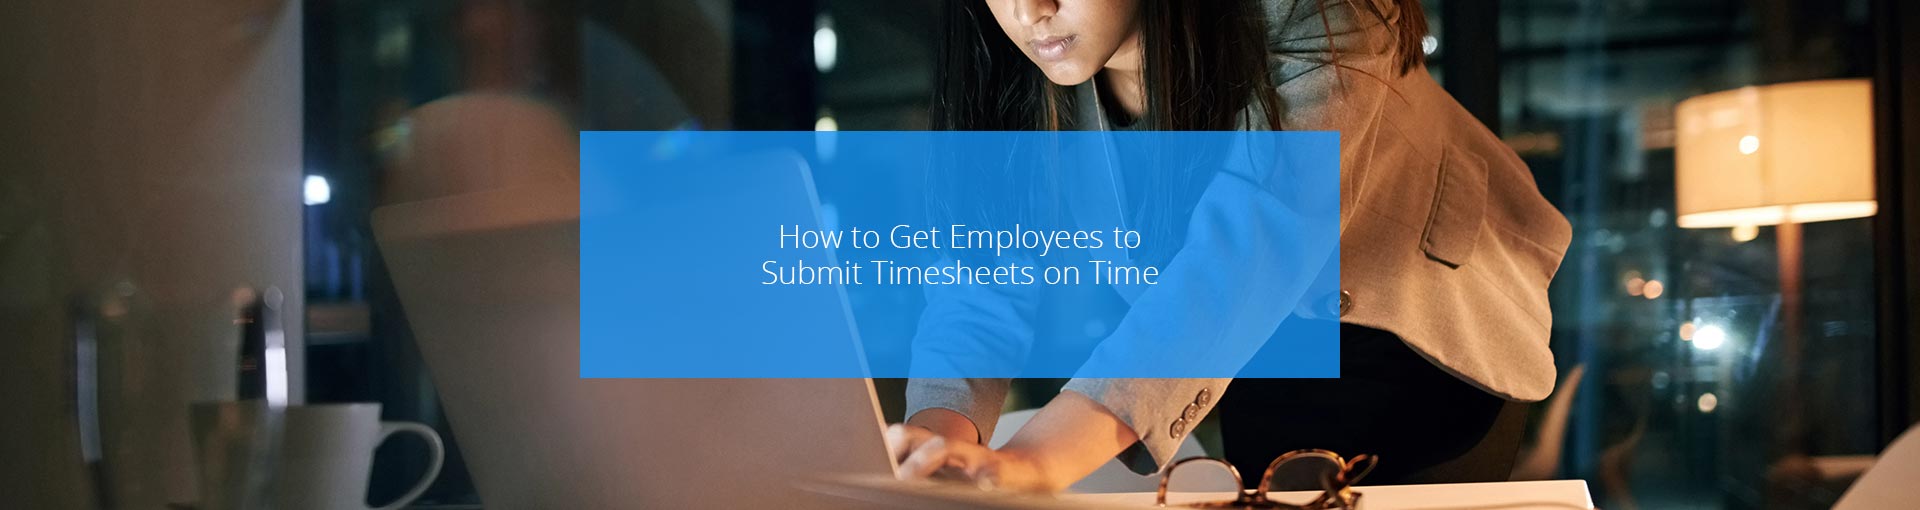 How to Get Employees to Submit Timesheets on Time Featured Image